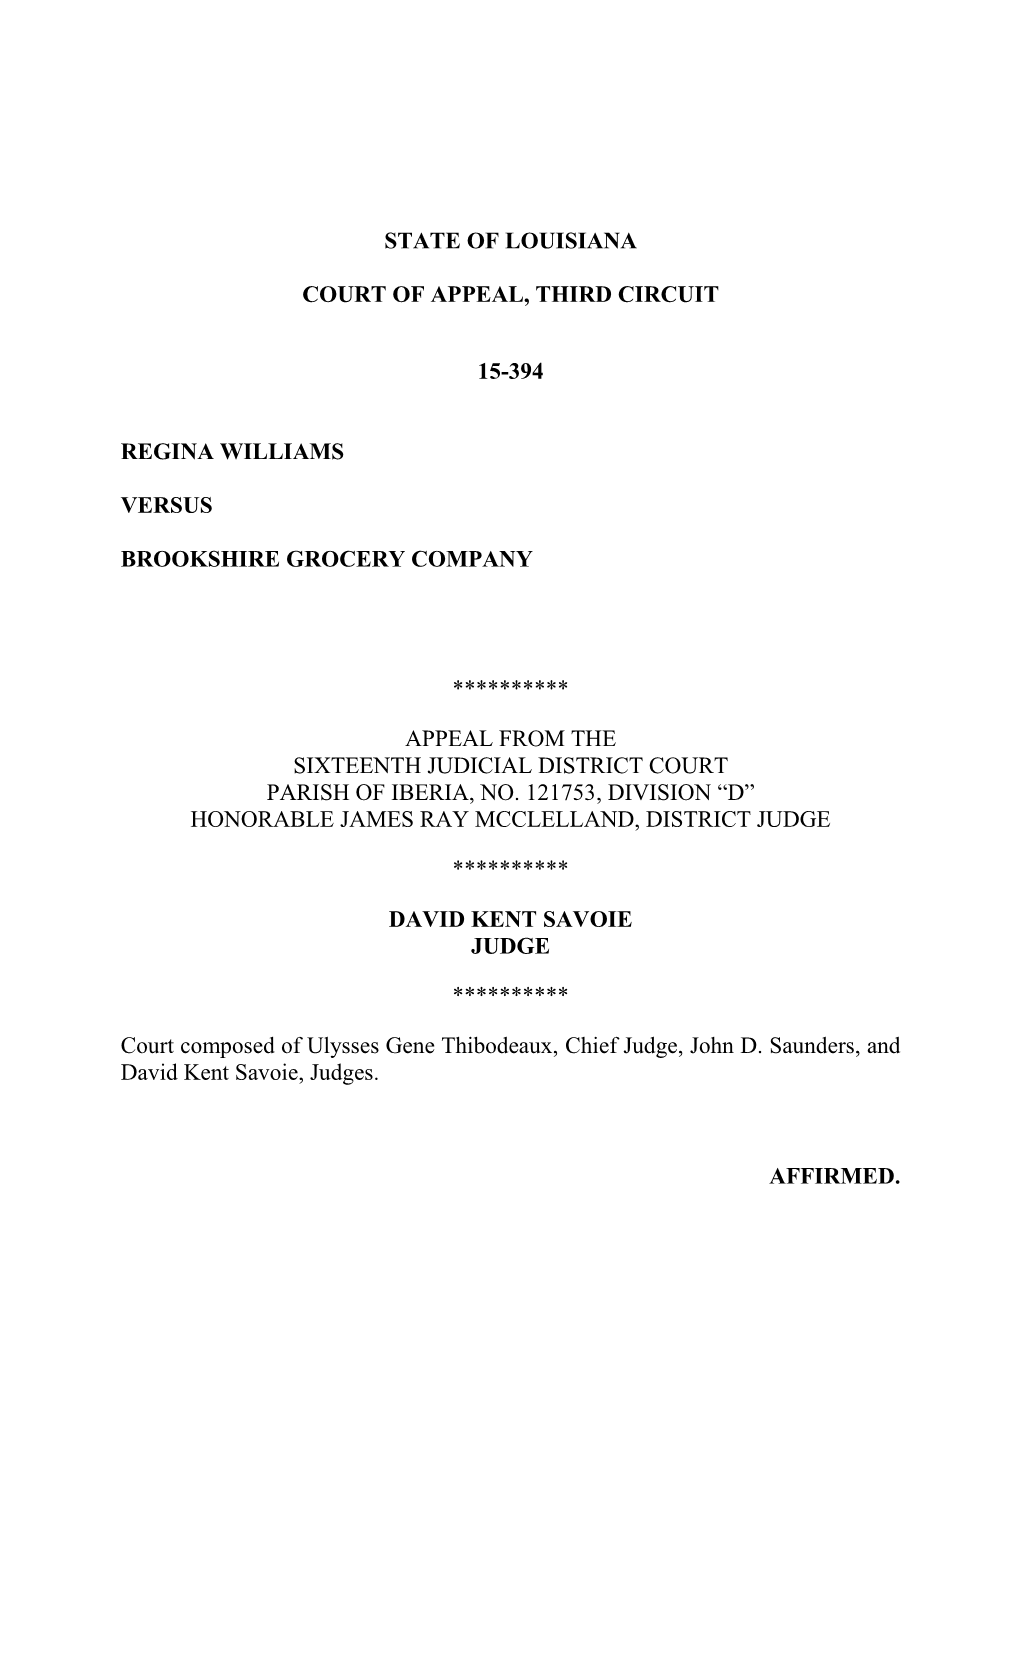 State of Louisiana Court of Appeal, Third Circuit 15-394 Regina Williams Versus Brookshire Grocery Company ********